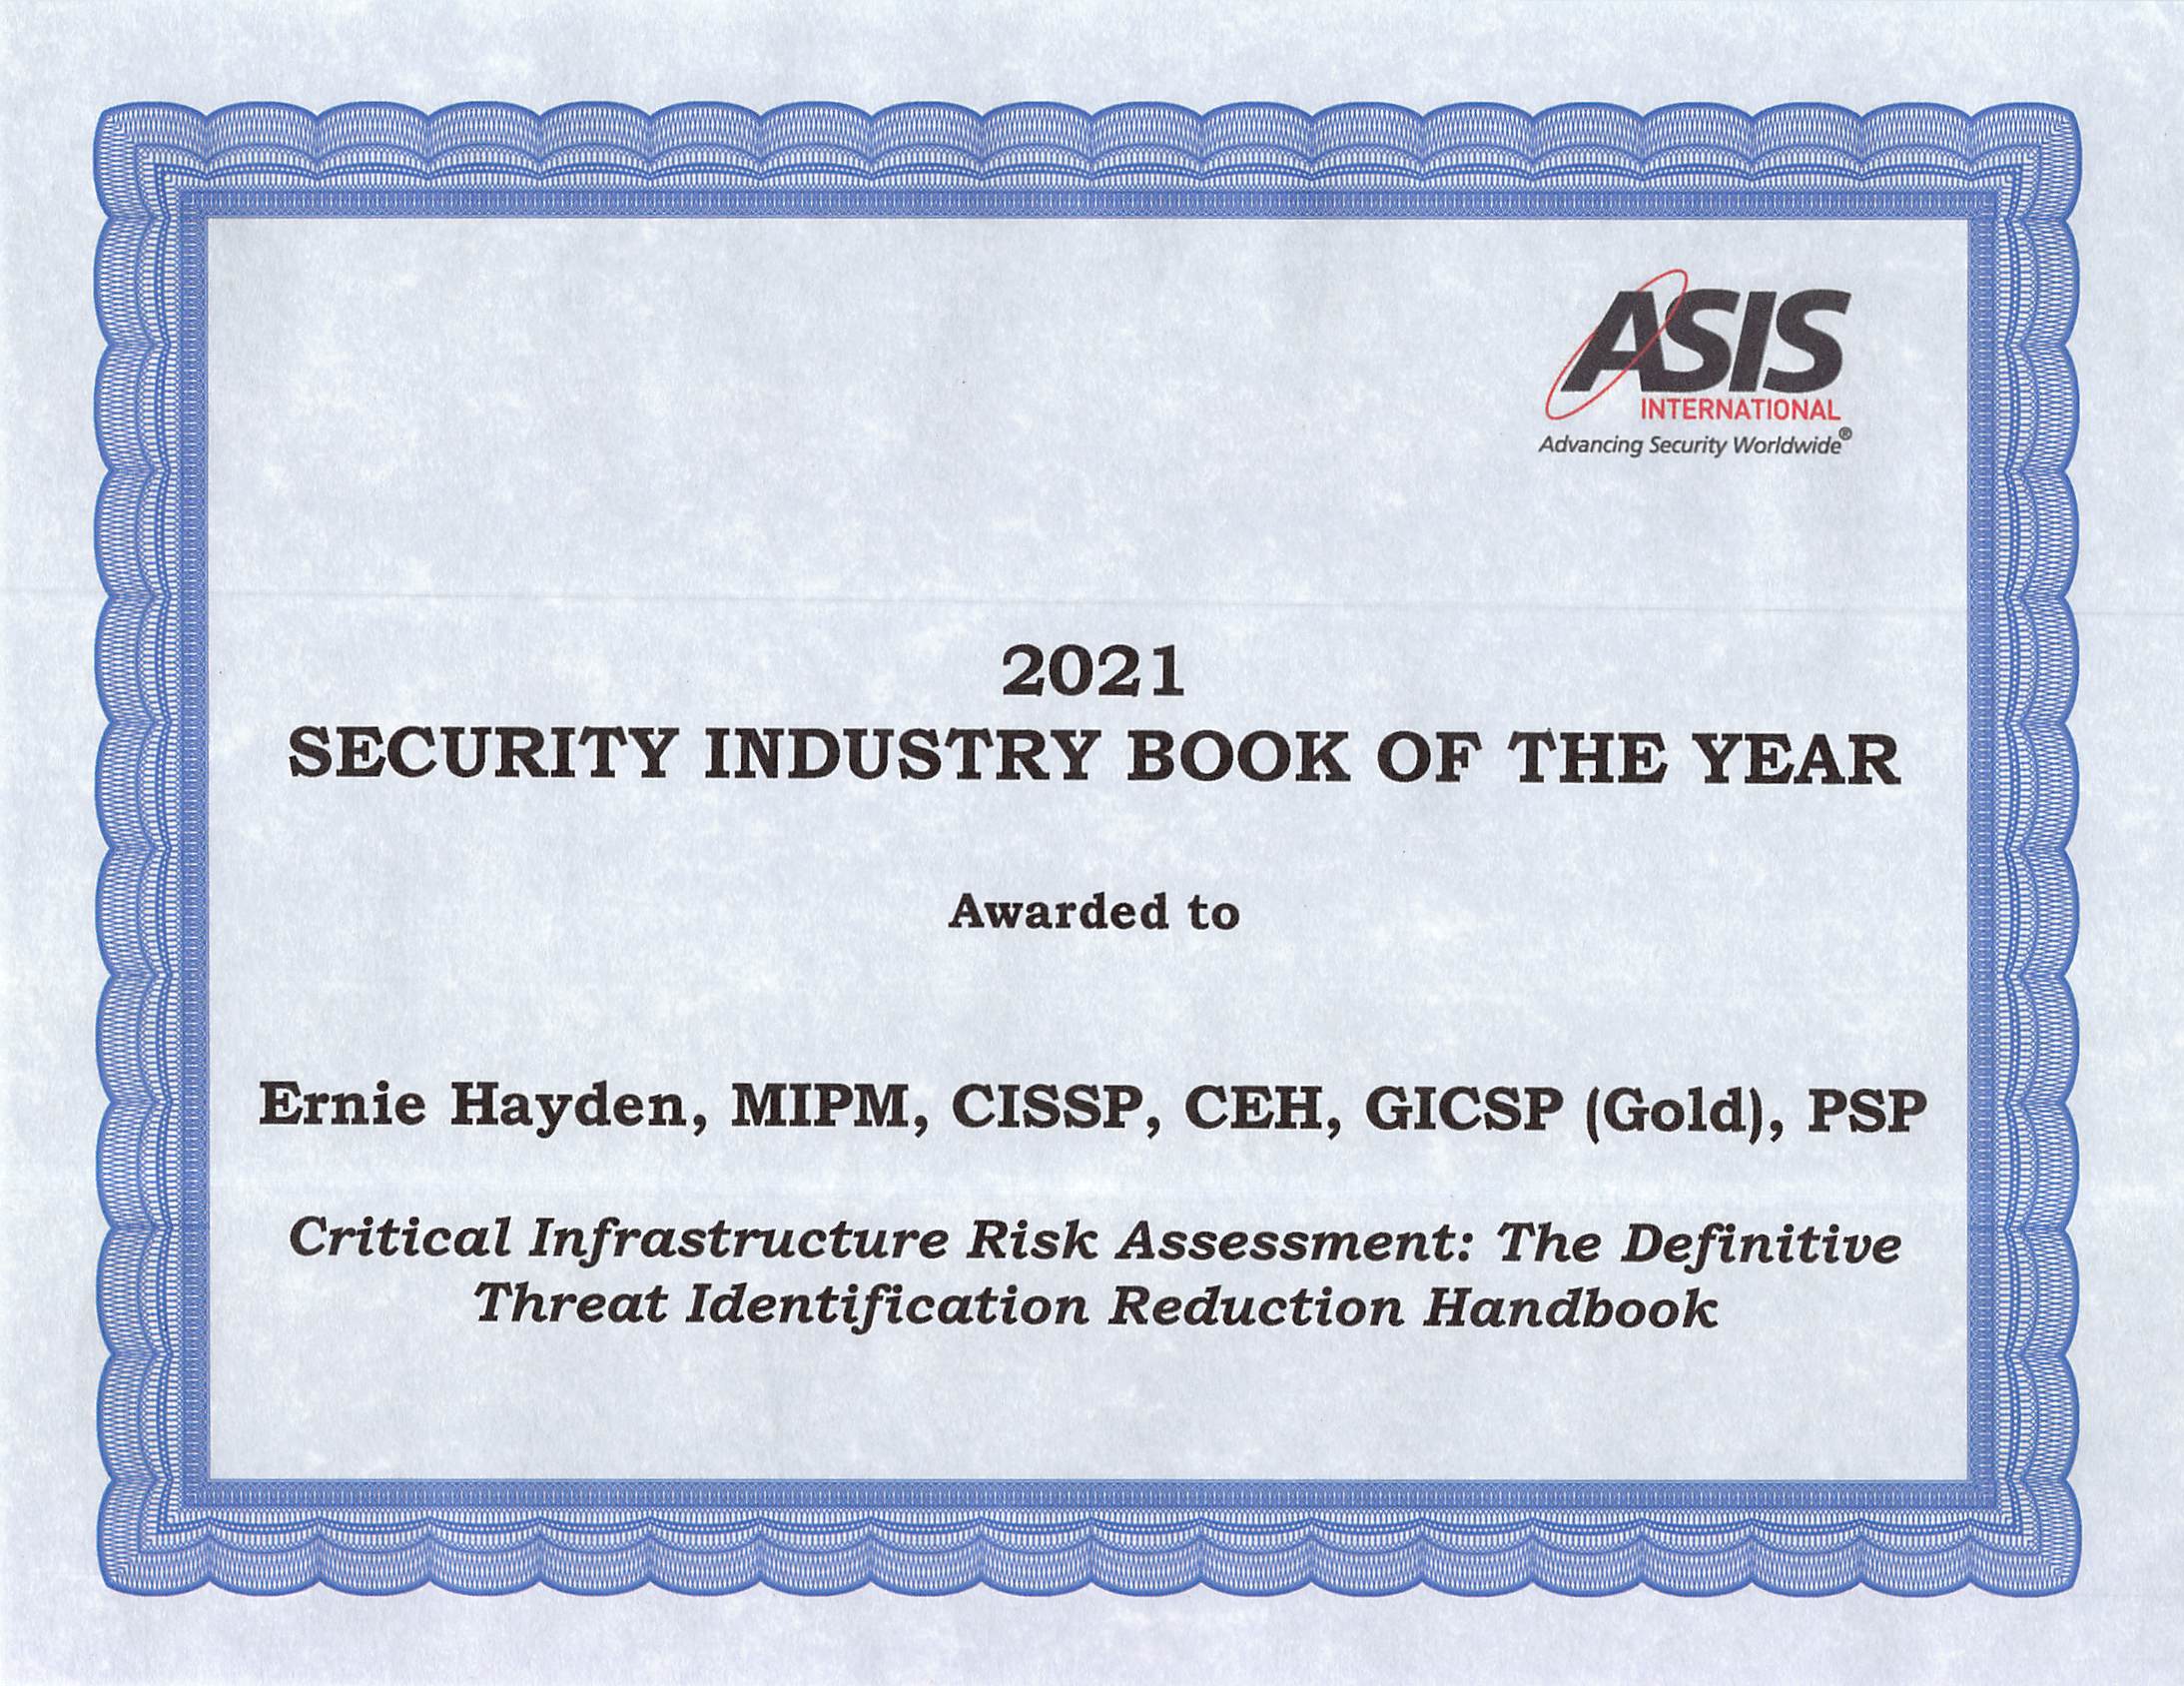 asis-international-book-of-the-year-rothstein-publishing